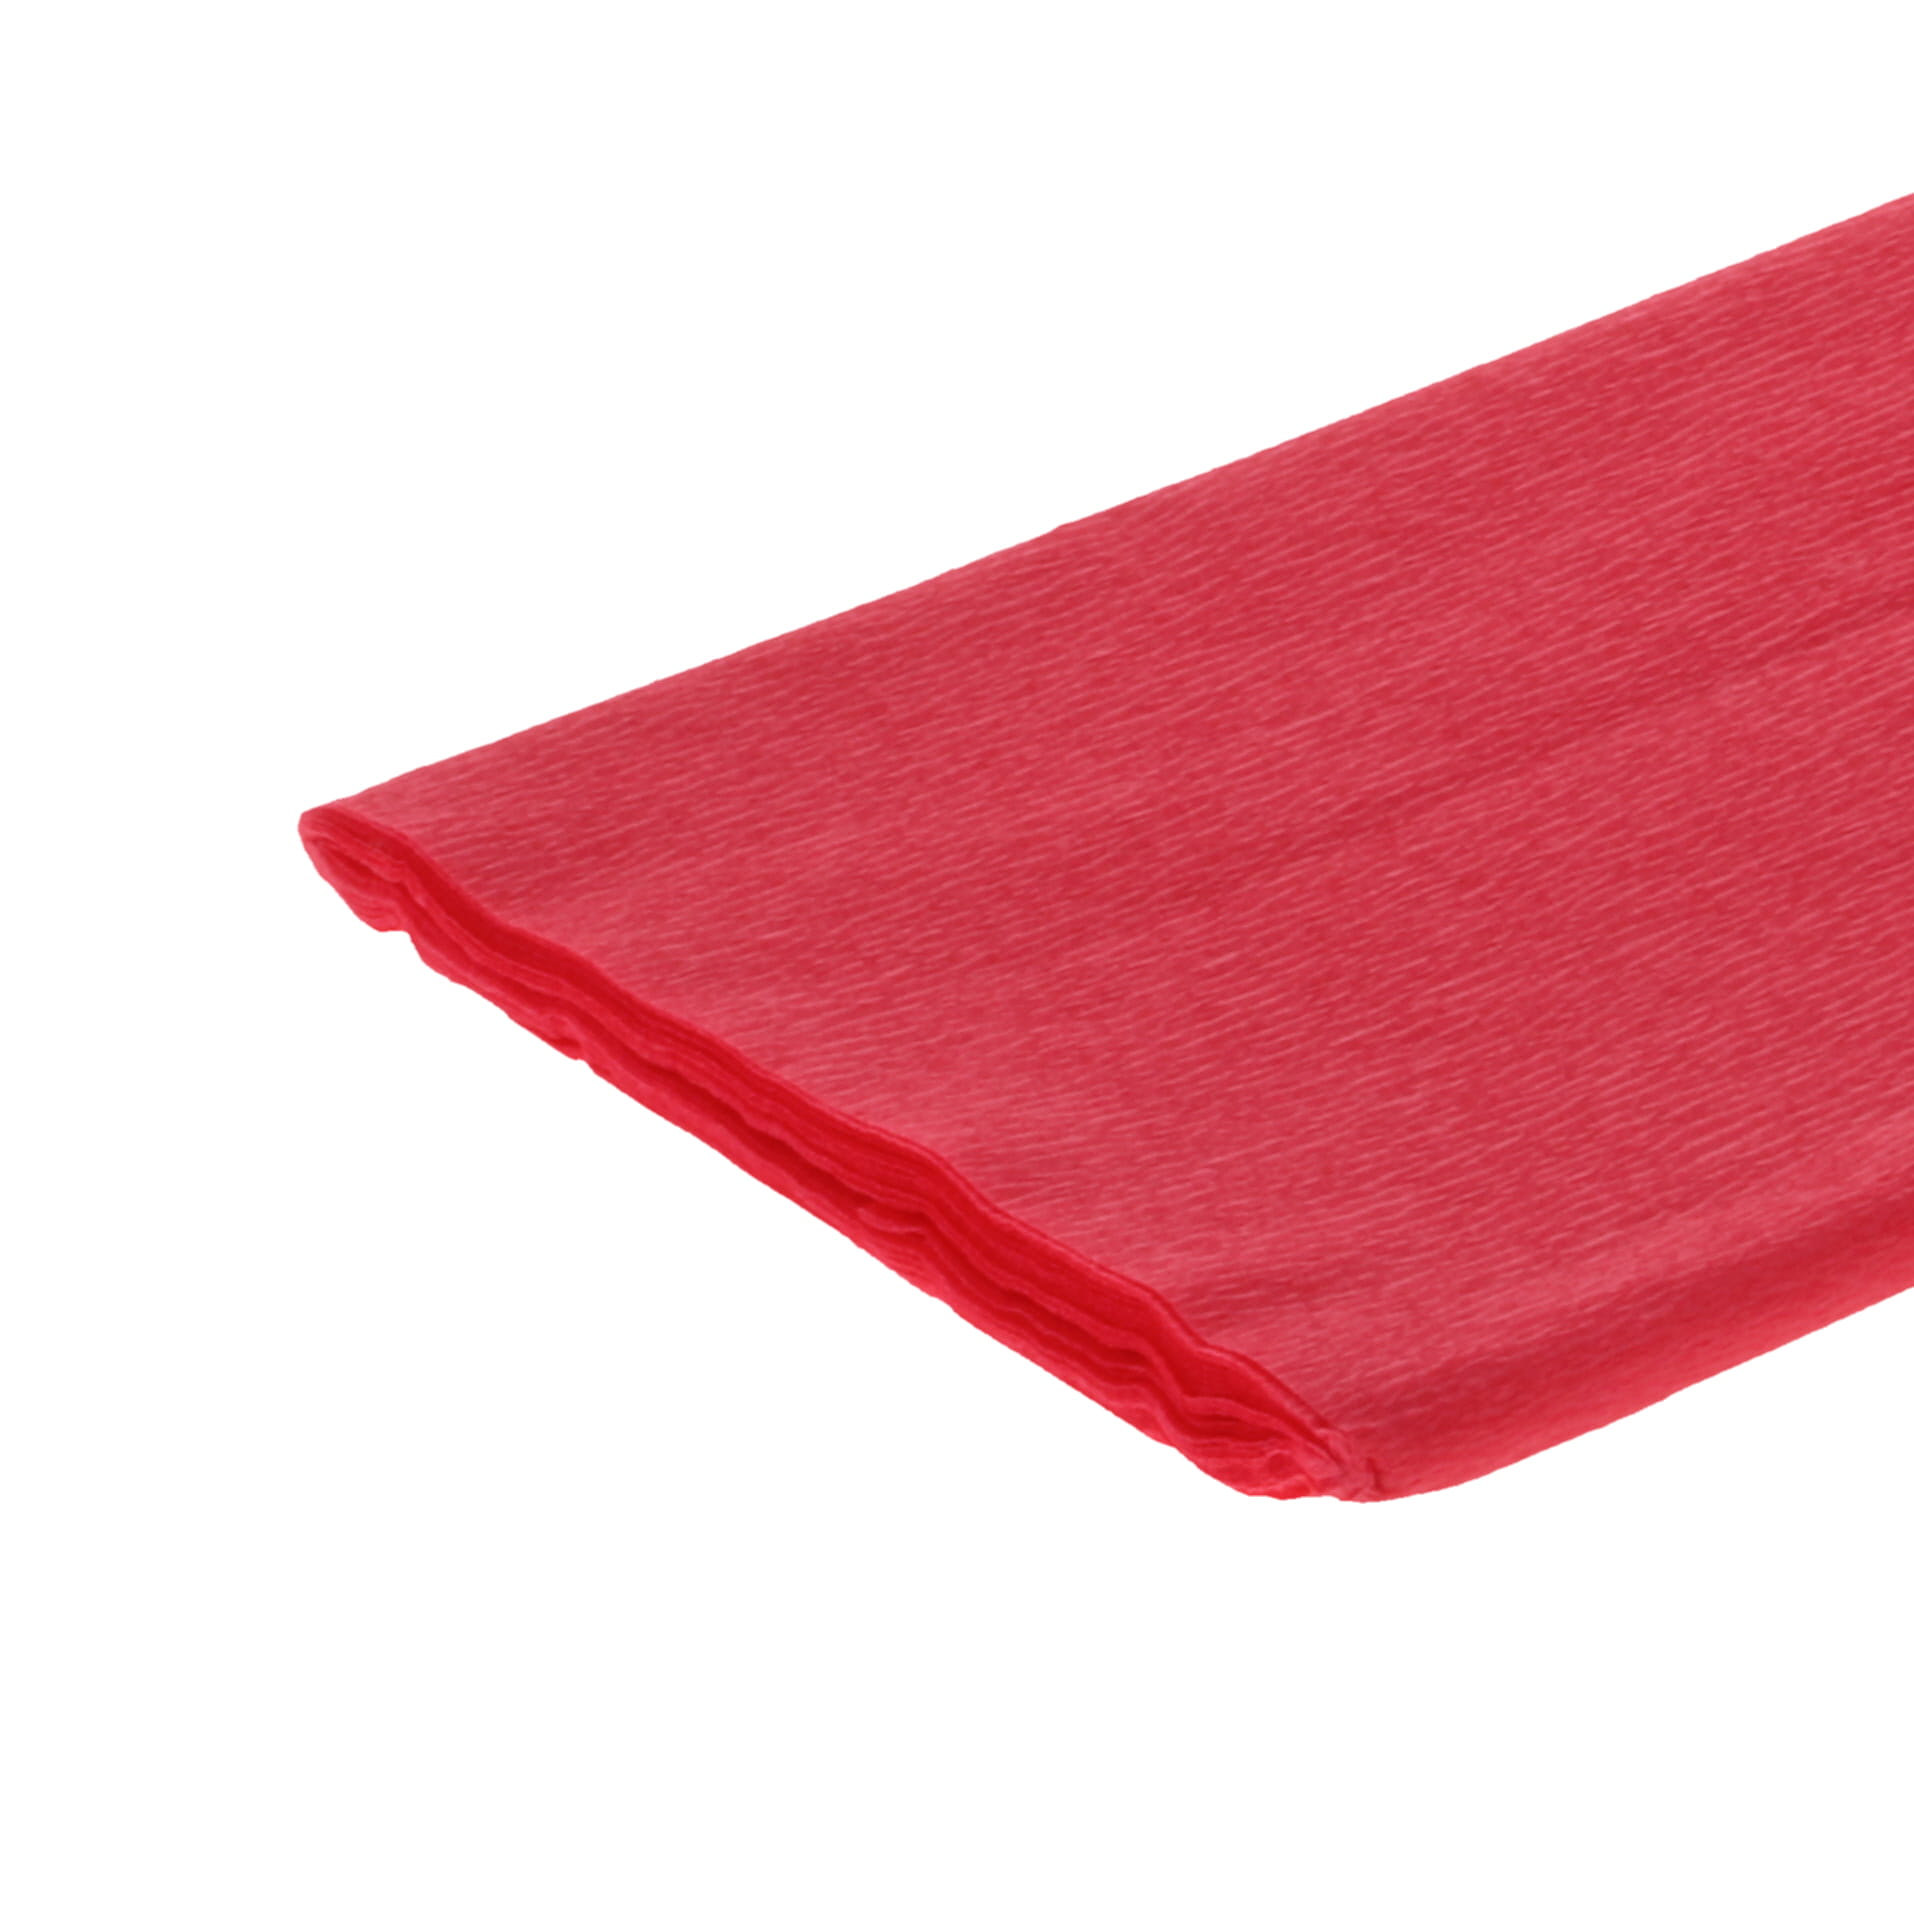 Crepe Paper Red - 51cm x 3m - pack of 10